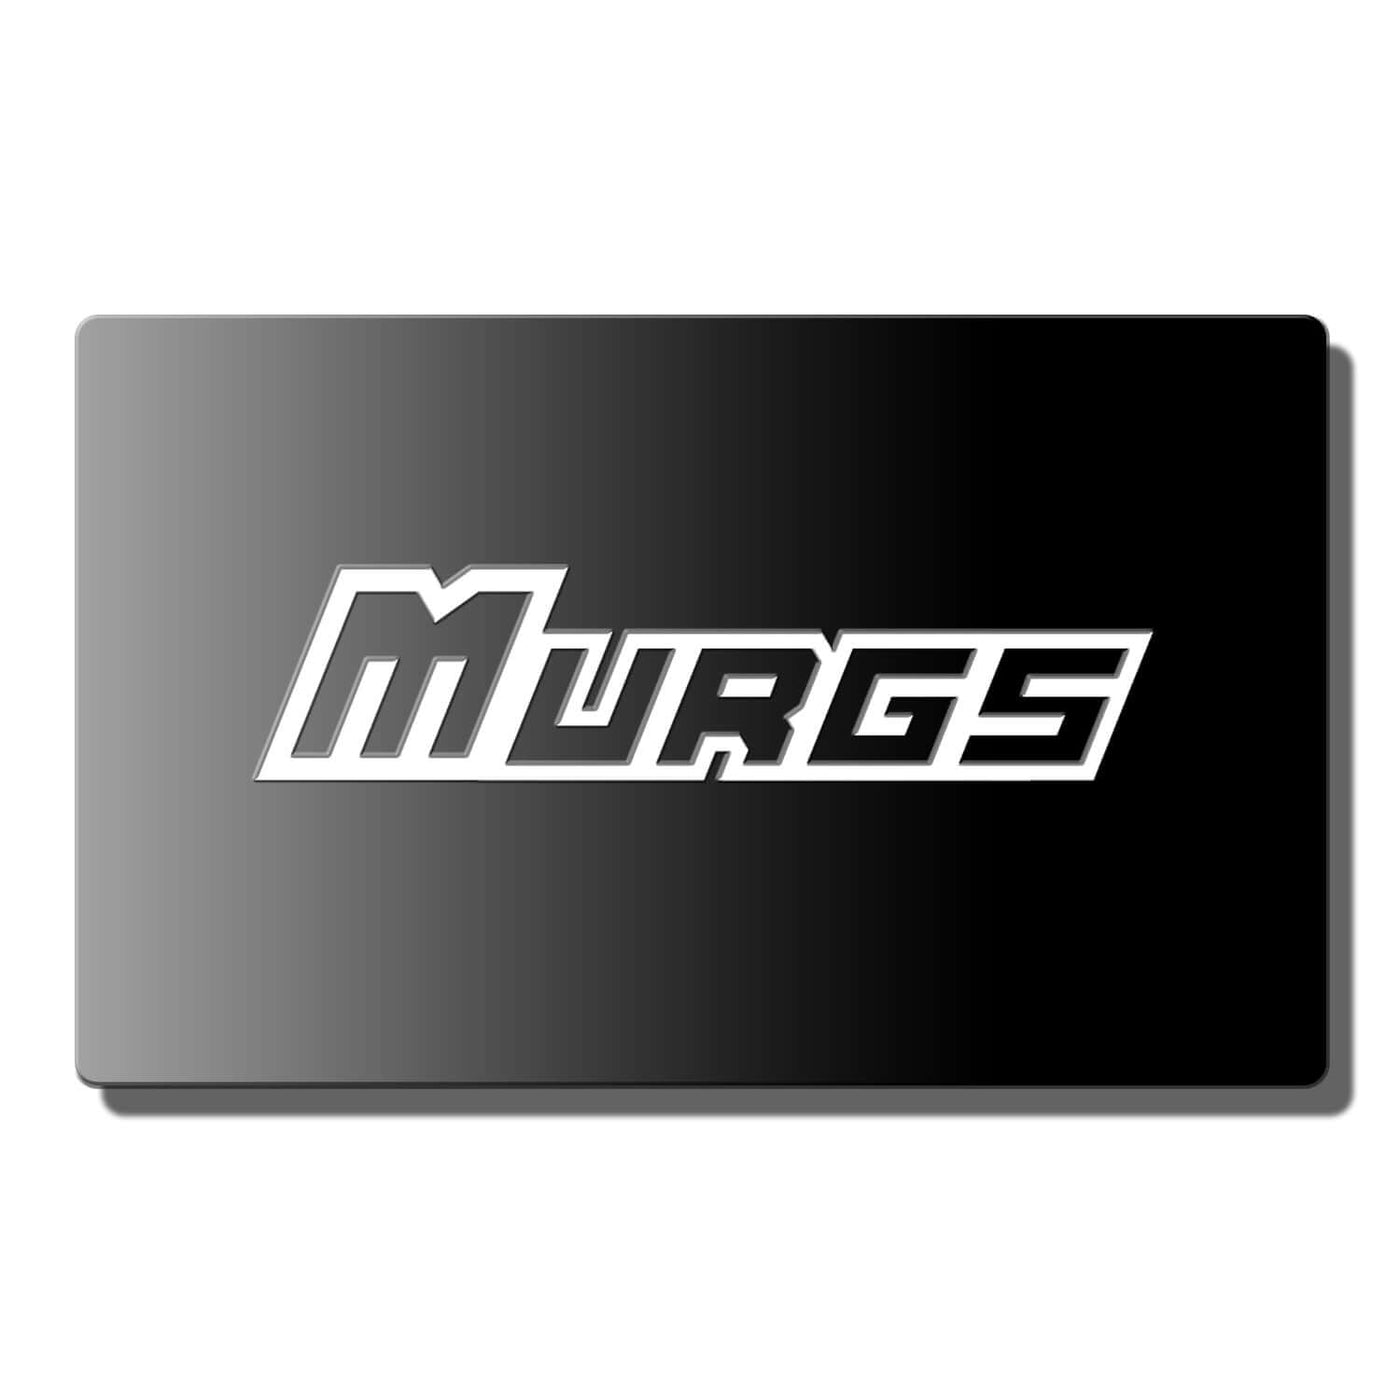 Murgs Virtual Gift Card available in a range of values.